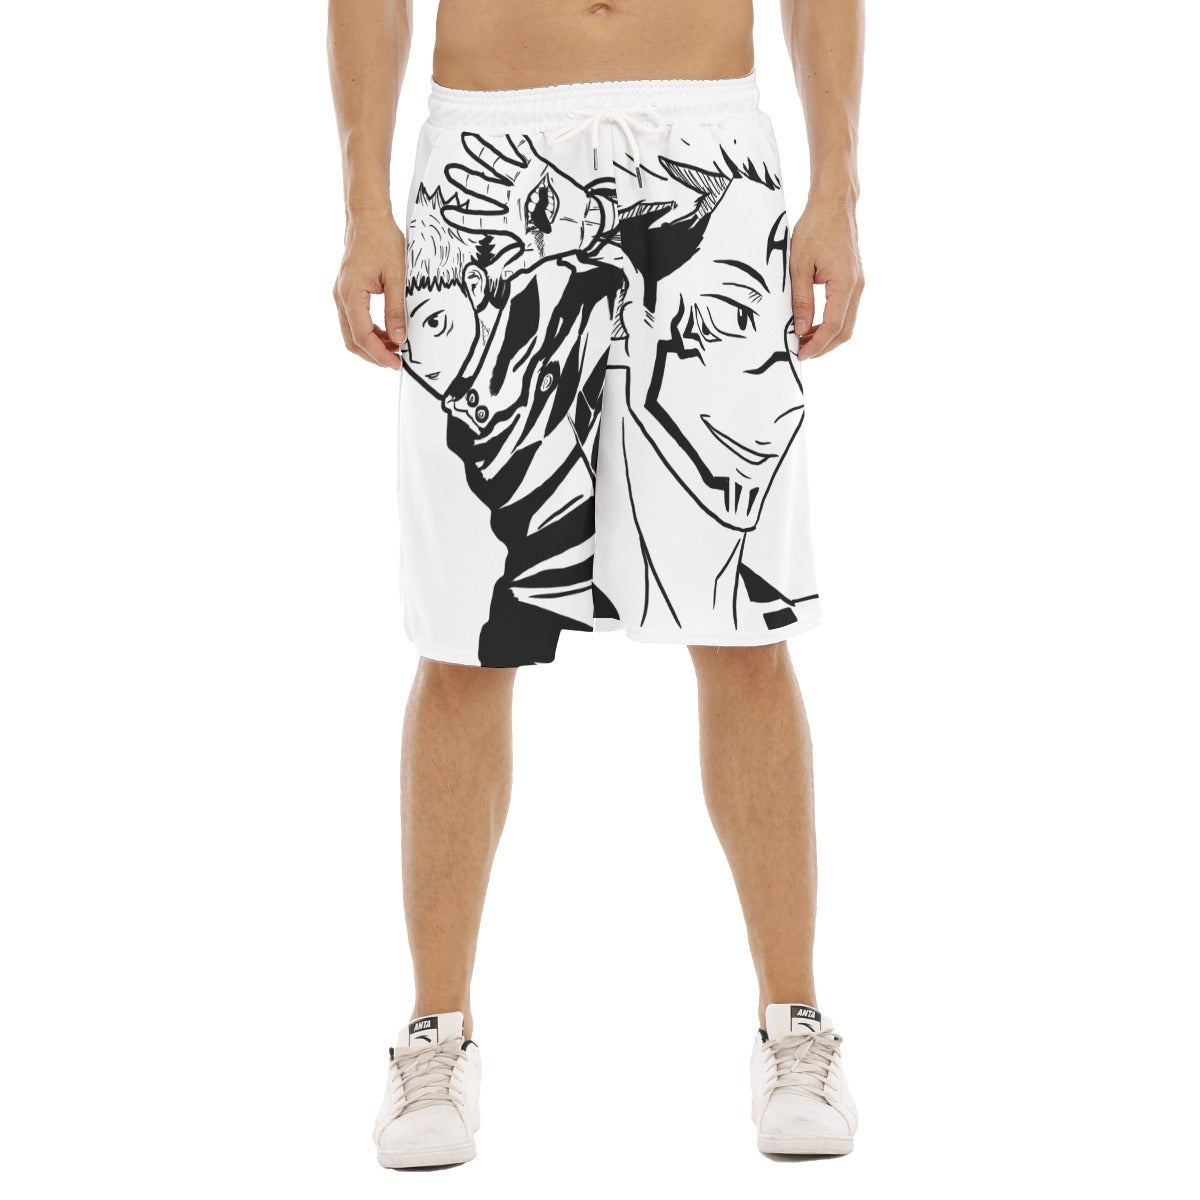 "CURSED KING VESSEL Tether Loose Shorts